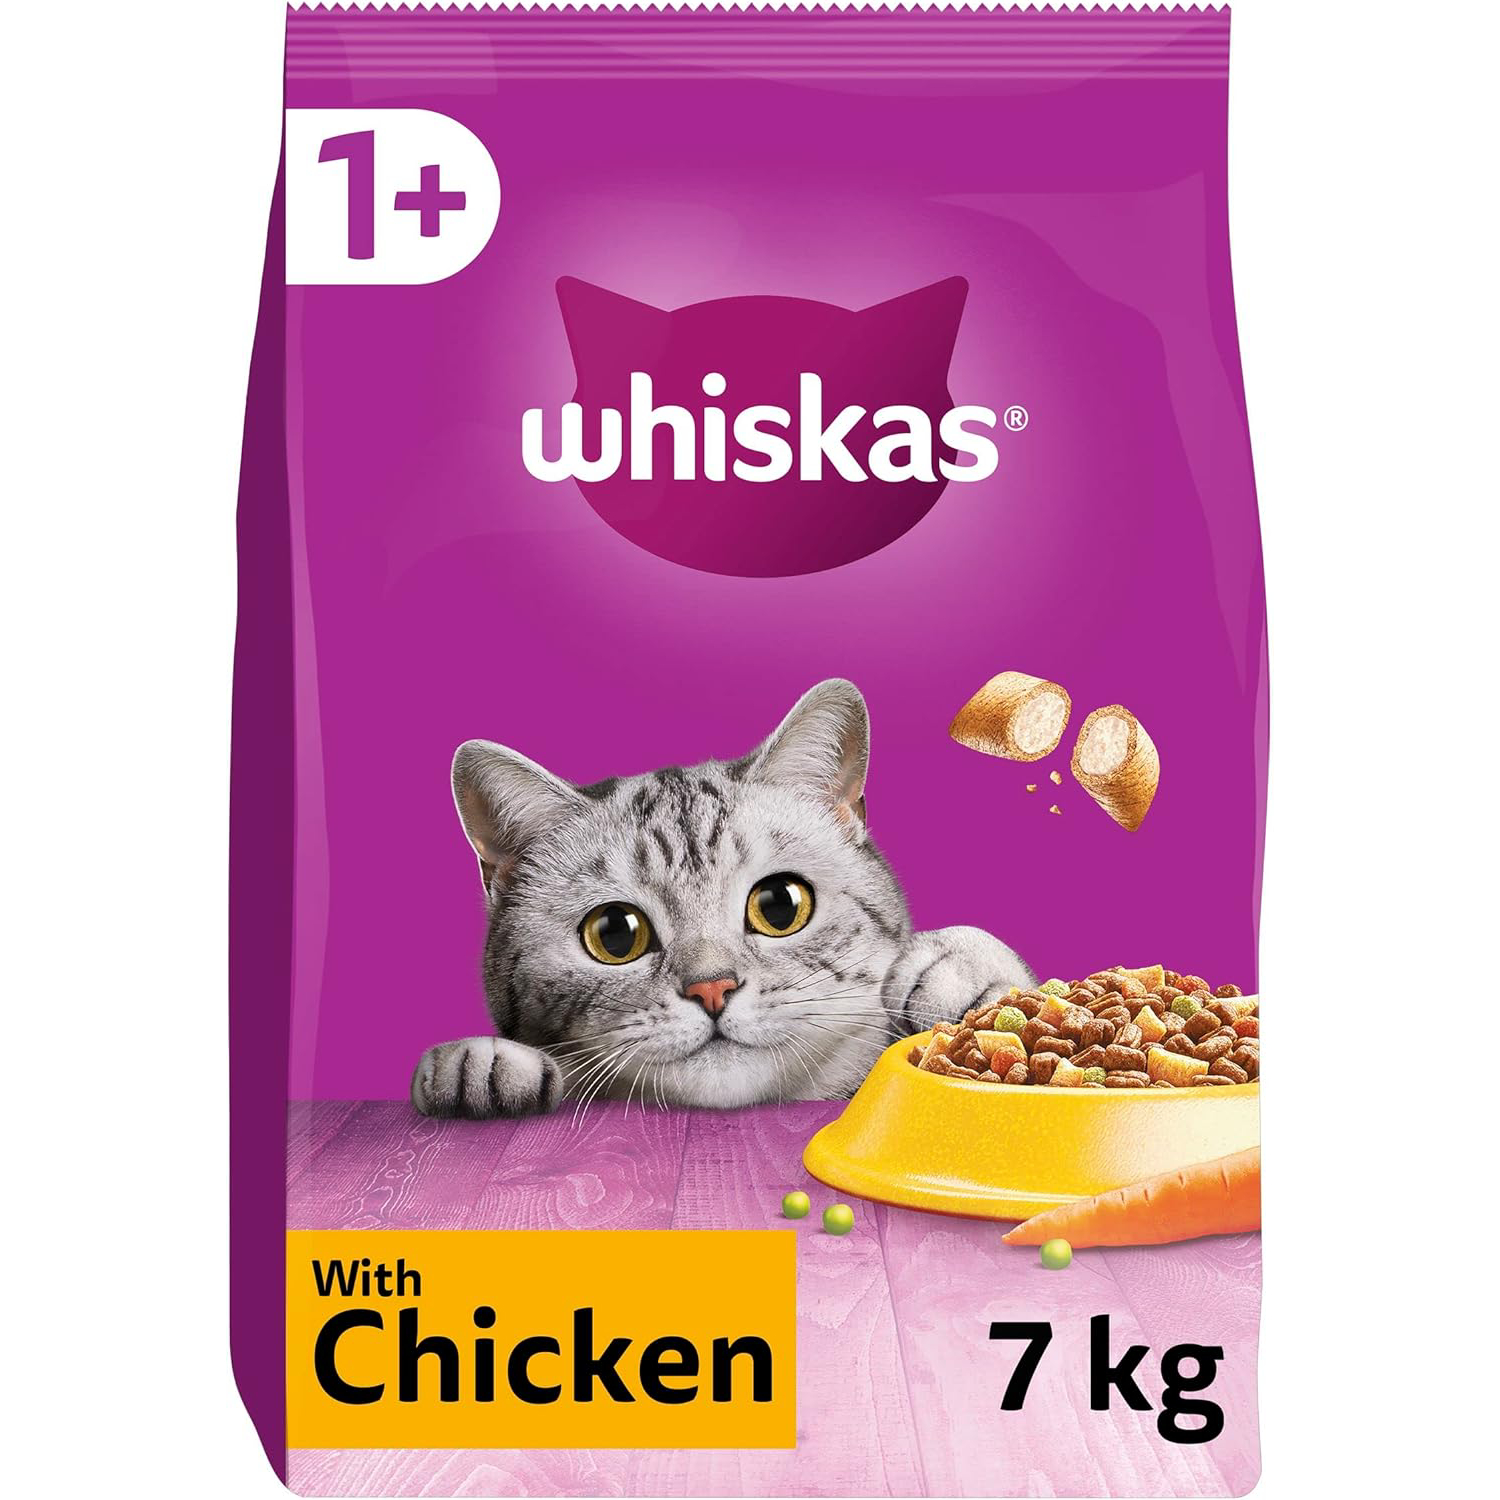 Whiskas 1+ Adult Chicken, Adult Dry Cat Food